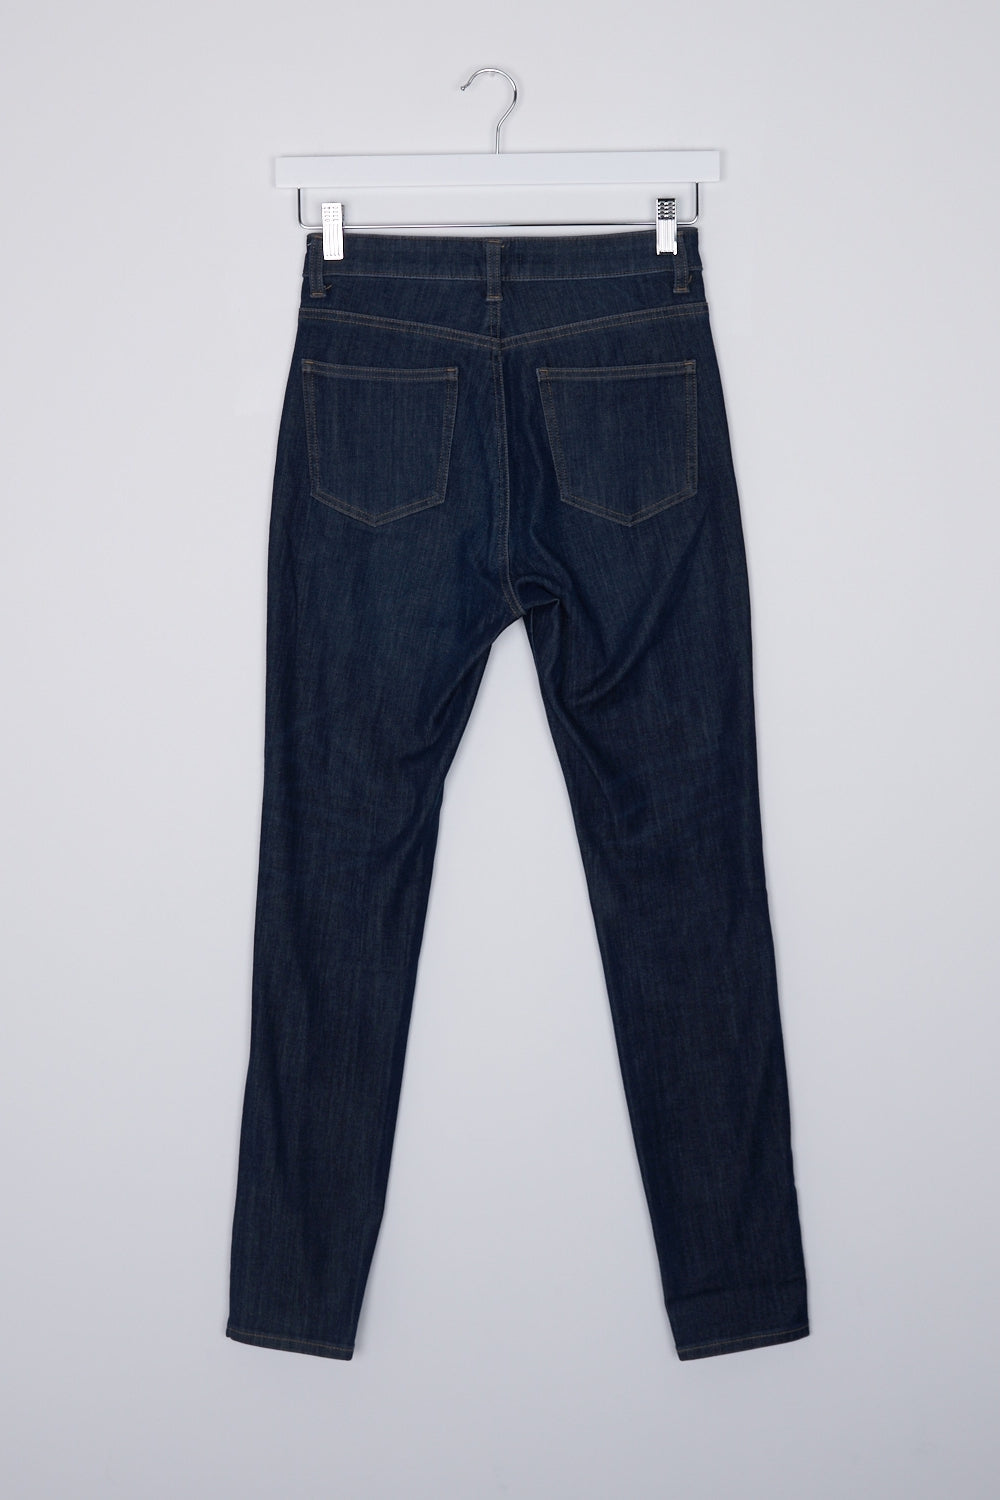 Uniqlo Blue High Rise Skinny Jeans S